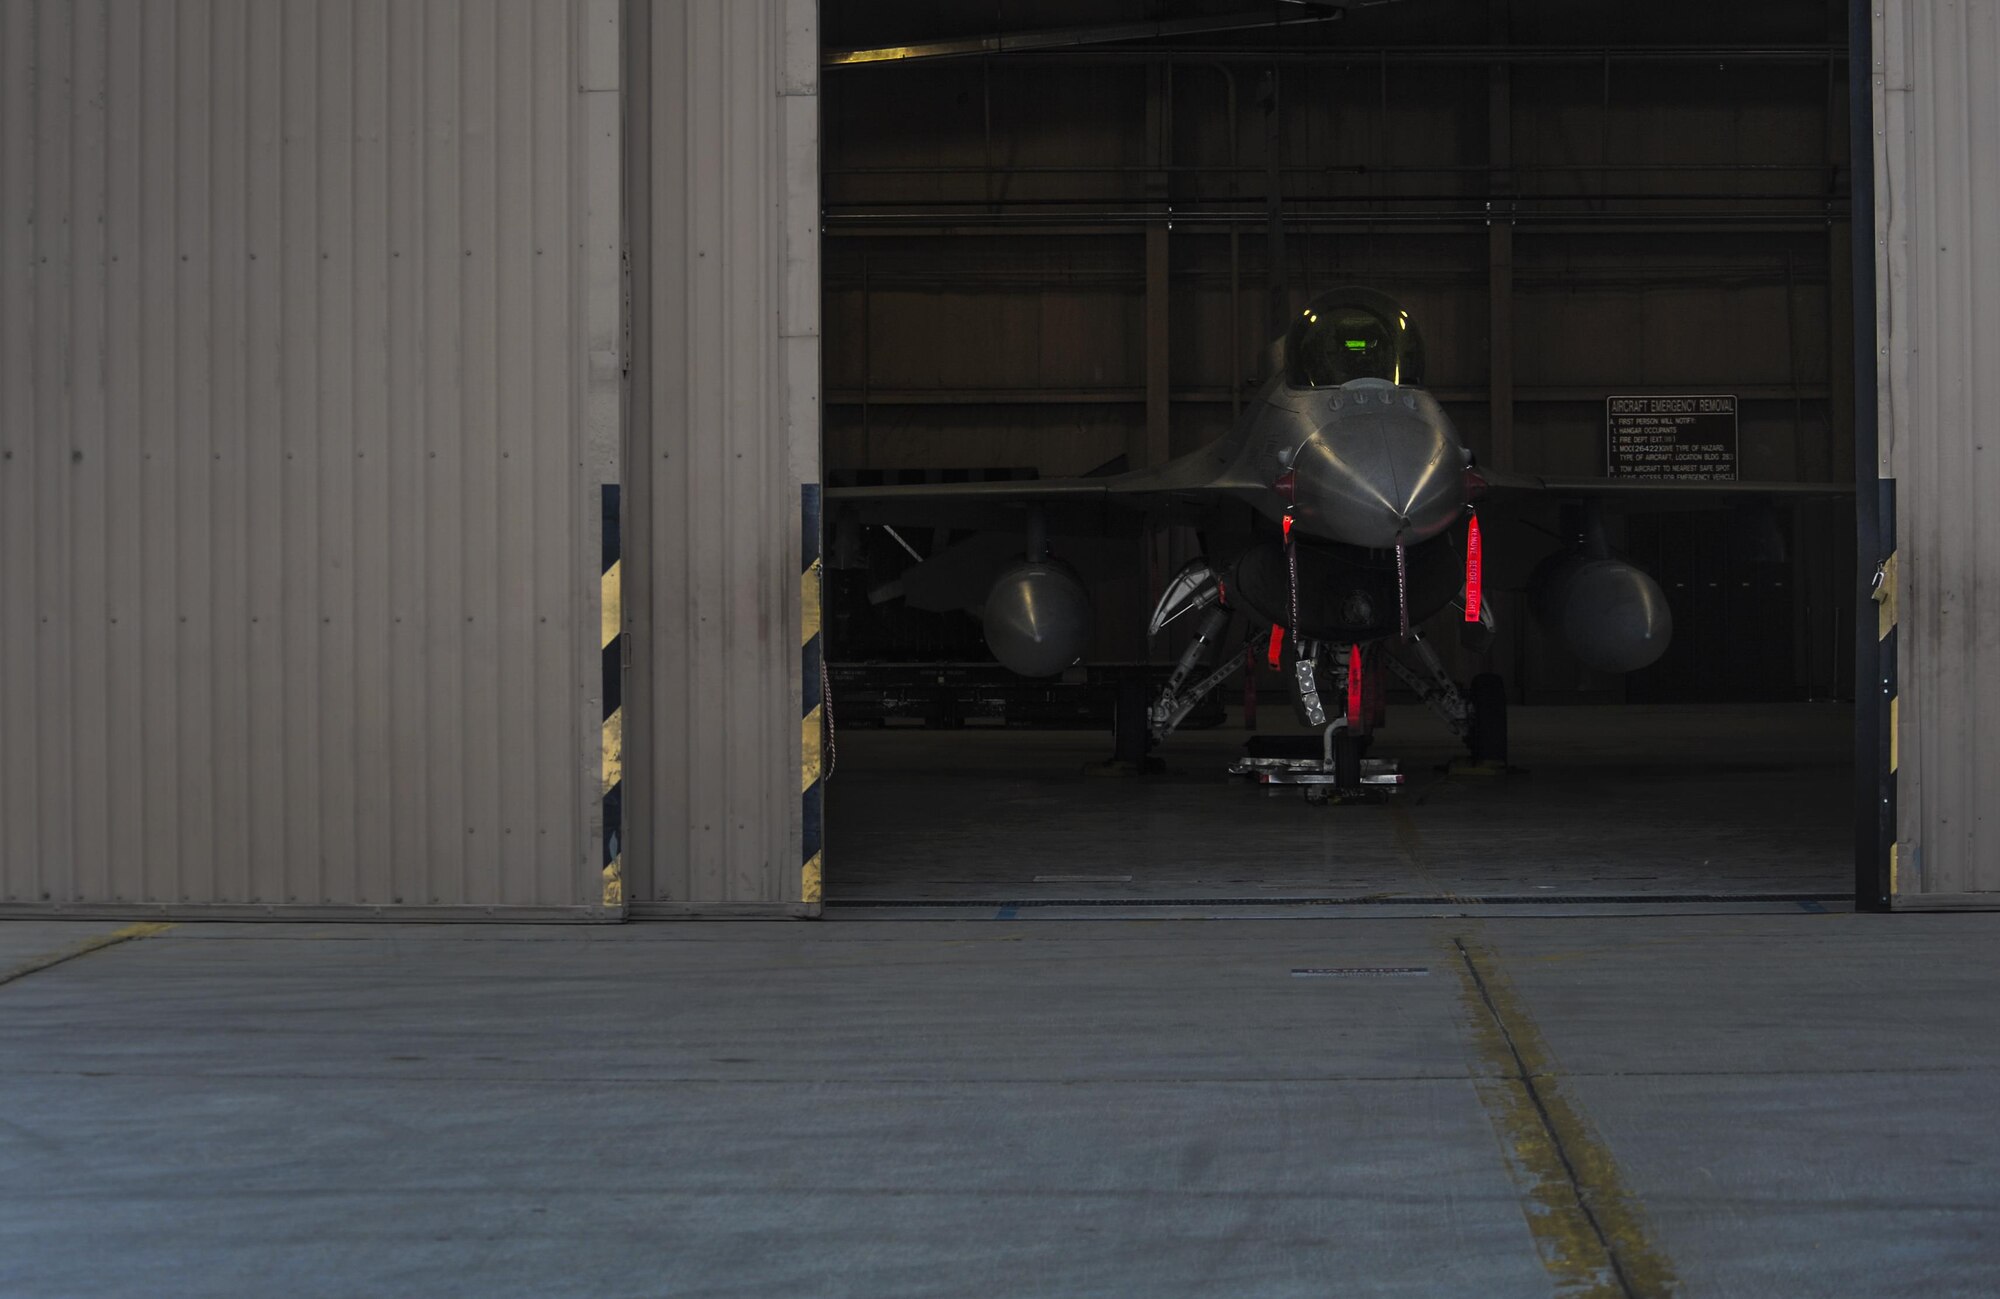 An F-16 Fighting Falcon sits in the hangar after the 57th Wings Load Crew of the Quarter Competition at Nellis Air Force Base, Nev., April 8, 2016. The load crew competition is a quarterly event held at Nellis AFB to highlight the exceptional airmen of the 57th Air Maintenance Squadron. (U.S. Air Force photo by Airman 1st Class Kevin Tanenbaum)